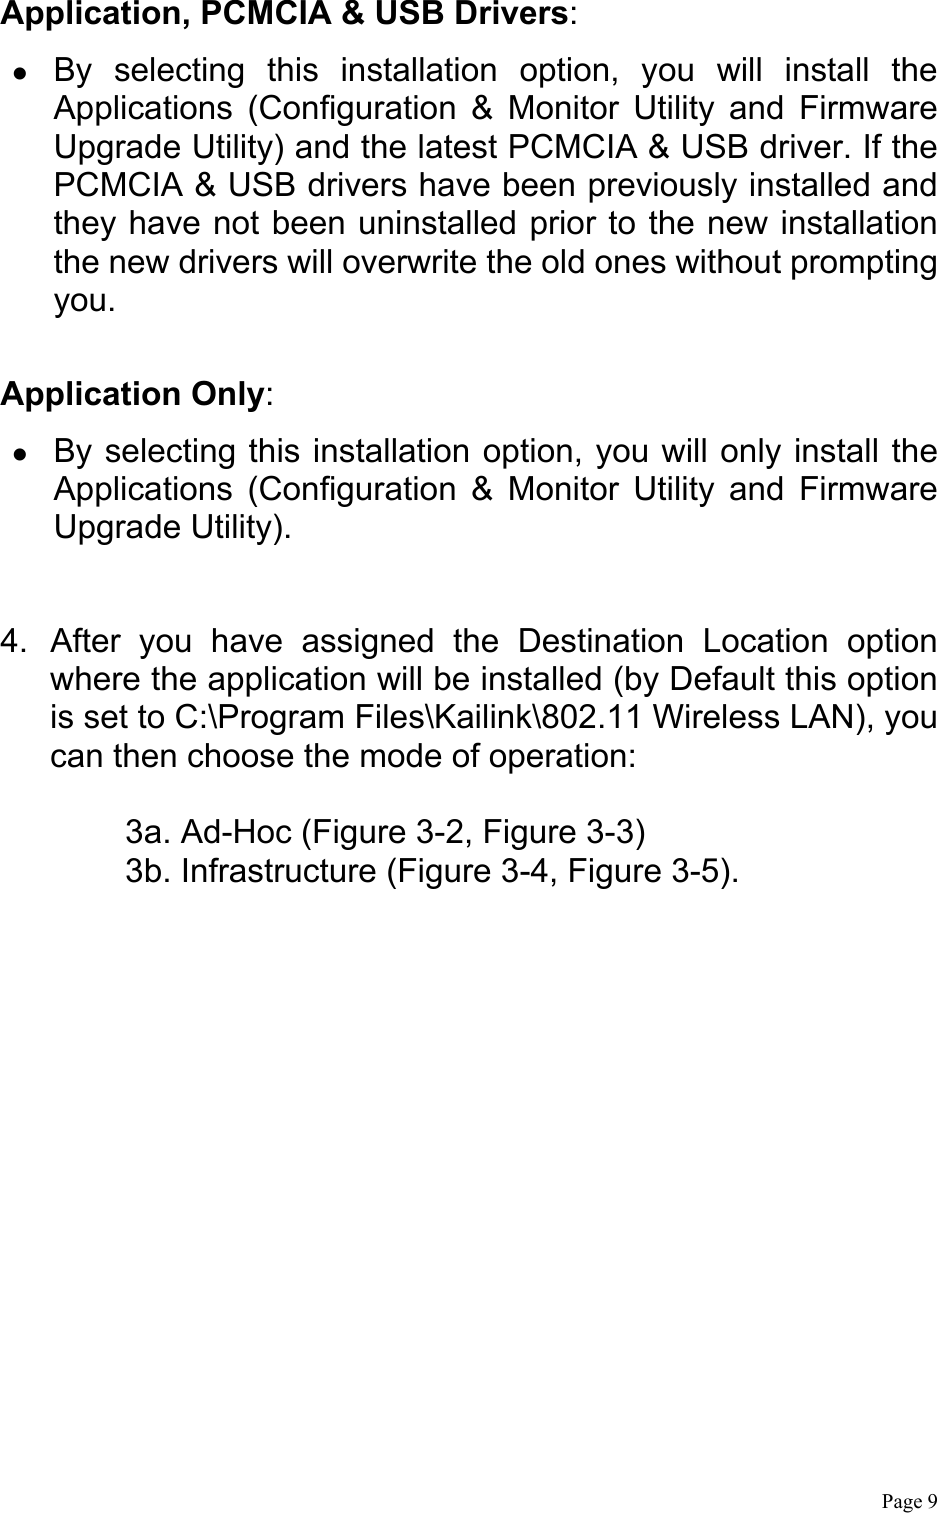  Page 9 Application, PCMCIA &amp; USB Drivers:   By selecting this installation option, you will install the Applications (Configuration &amp; Monitor Utility and Firmware Upgrade Utility) and the latest PCMCIA &amp; USB driver. If the PCMCIA &amp; USB drivers have been previously installed and they have not been uninstalled prior to the new installation the new drivers will overwrite the old ones without prompting you.  Application Only:   By selecting this installation option, you will only install the Applications (Configuration &amp; Monitor Utility and Firmware Upgrade Utility).  4.  After you have assigned the Destination Location option where the application will be installed (by Default this option is set to C:\Program Files\Kailink\802.11 Wireless LAN), you can then choose the mode of operation:  3a. Ad-Hoc (Figure 3-2, Figure 3-3) 3b. Infrastructure (Figure 3-4, Figure 3-5). 